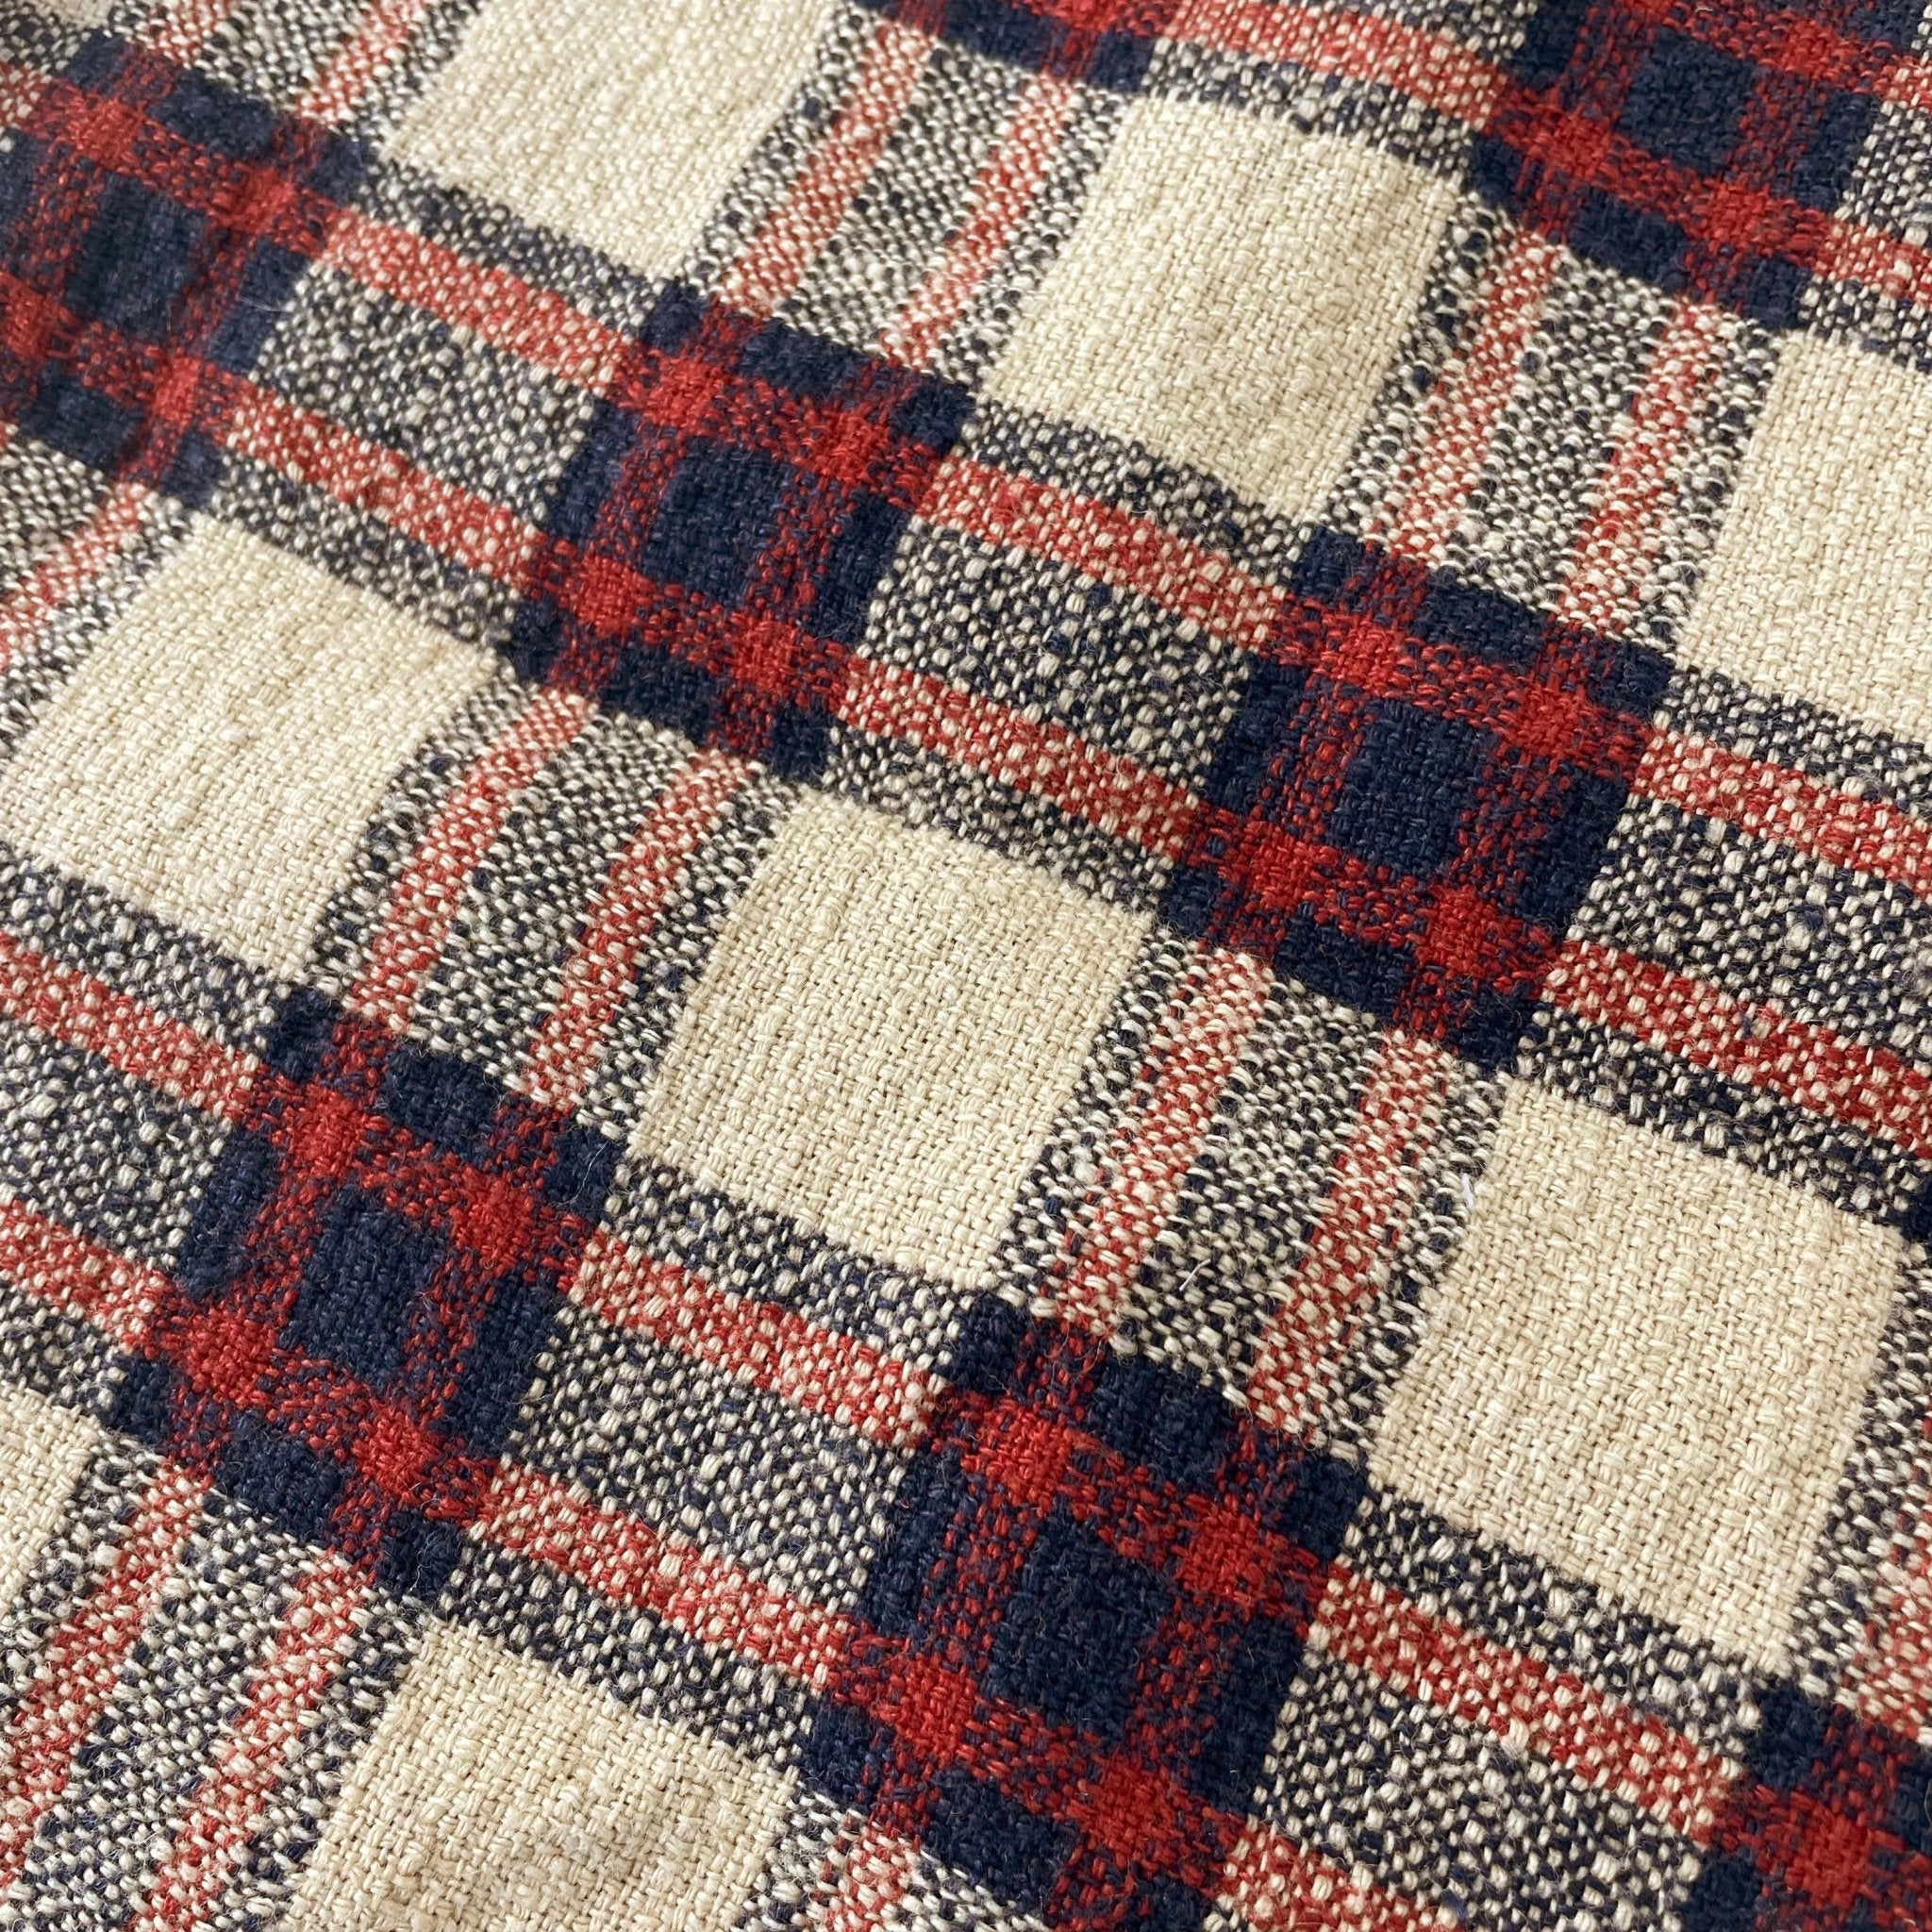 Linen 100% Fabric Heavy Weight Plaid 7242 - The Linen Lab - Beige